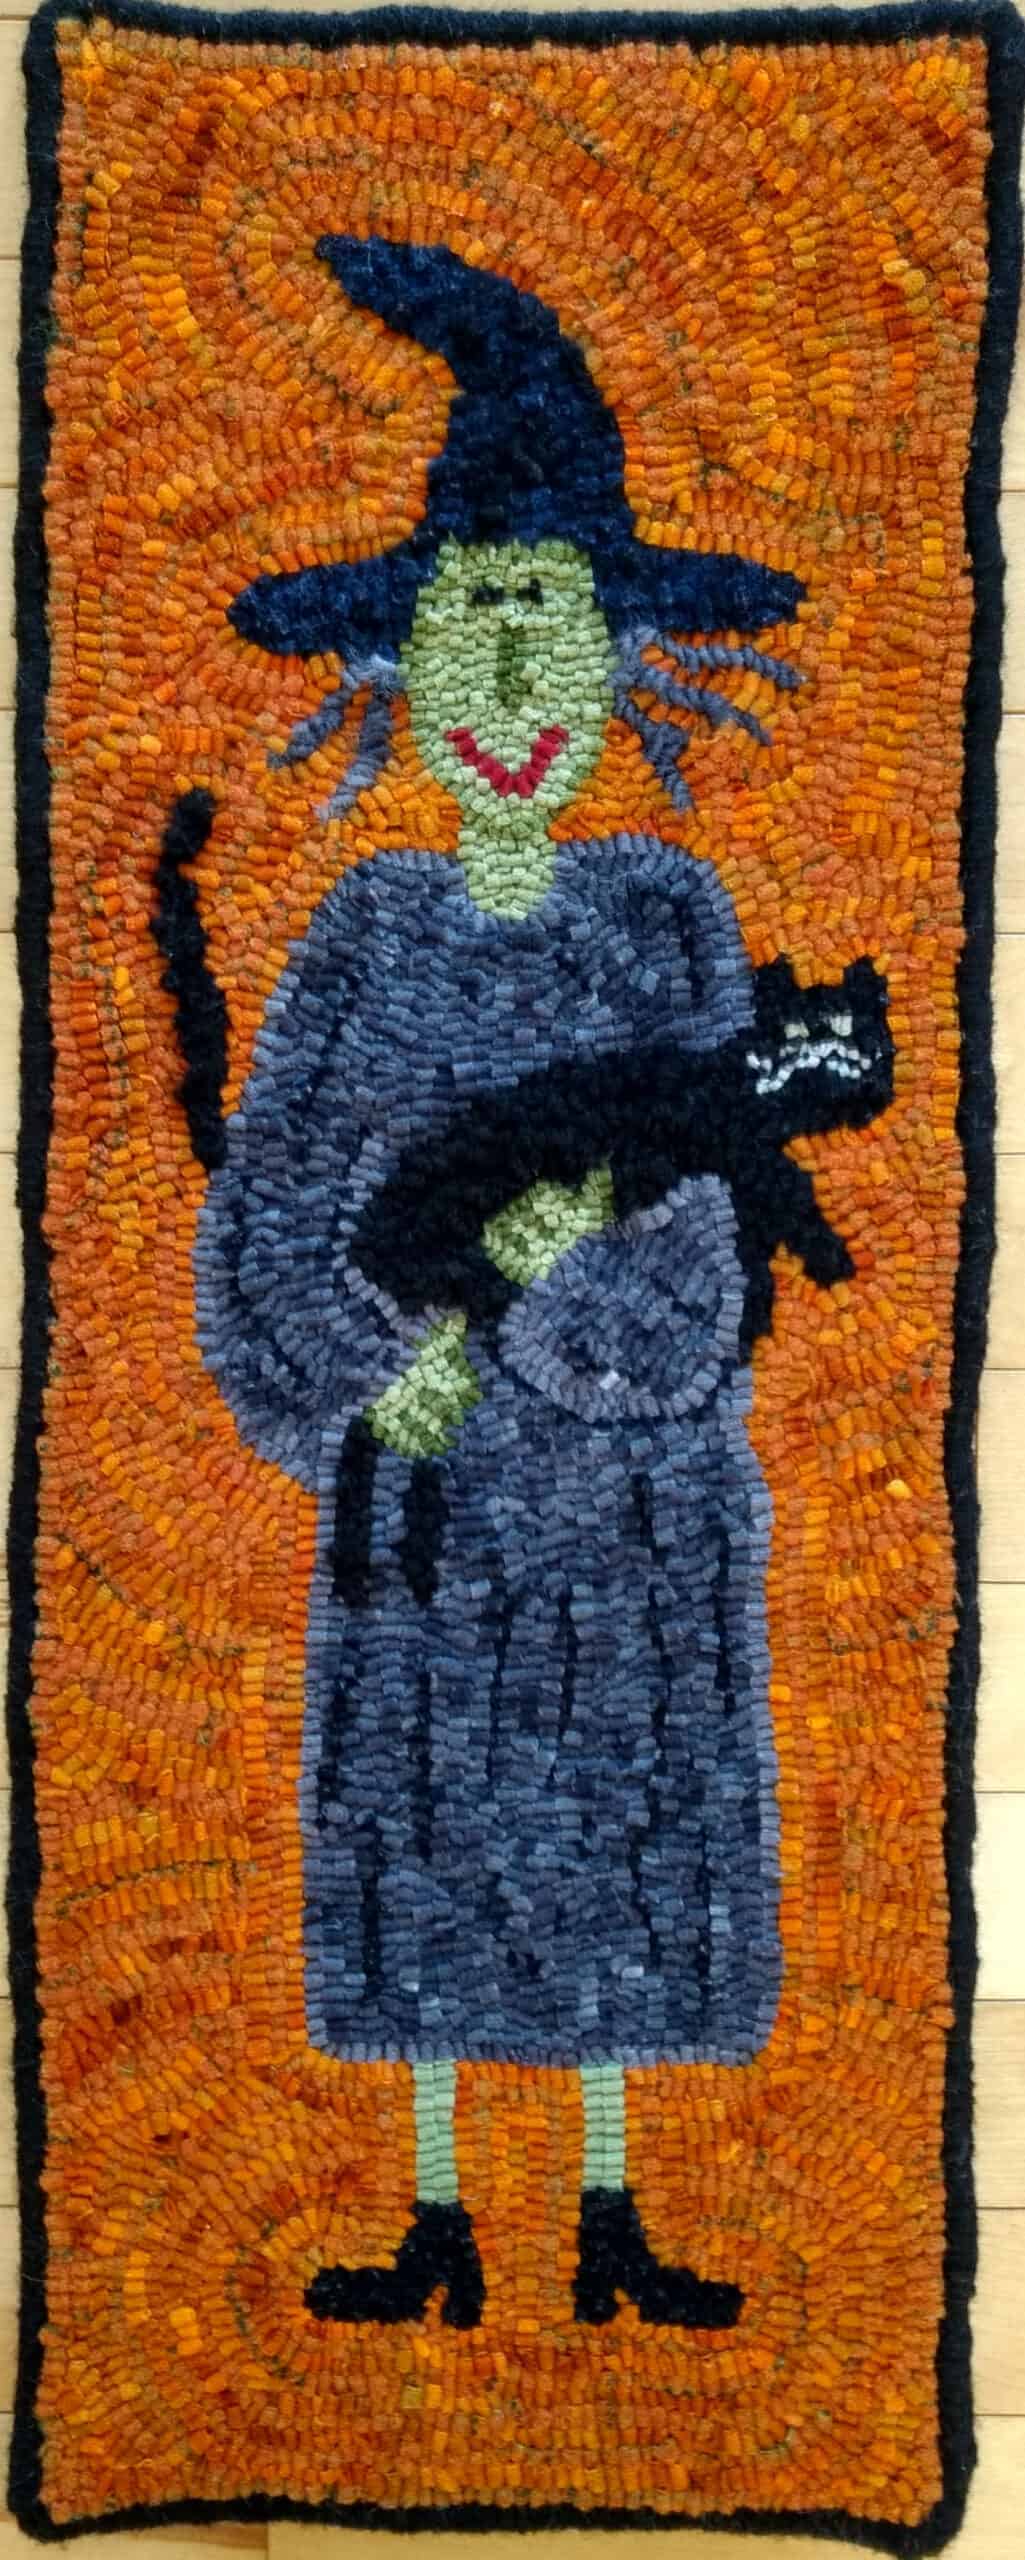 A Woolen Memories design hooked and photographed by Heather Fenz, St. Marys ON, completed in 2021, 9" x 25"